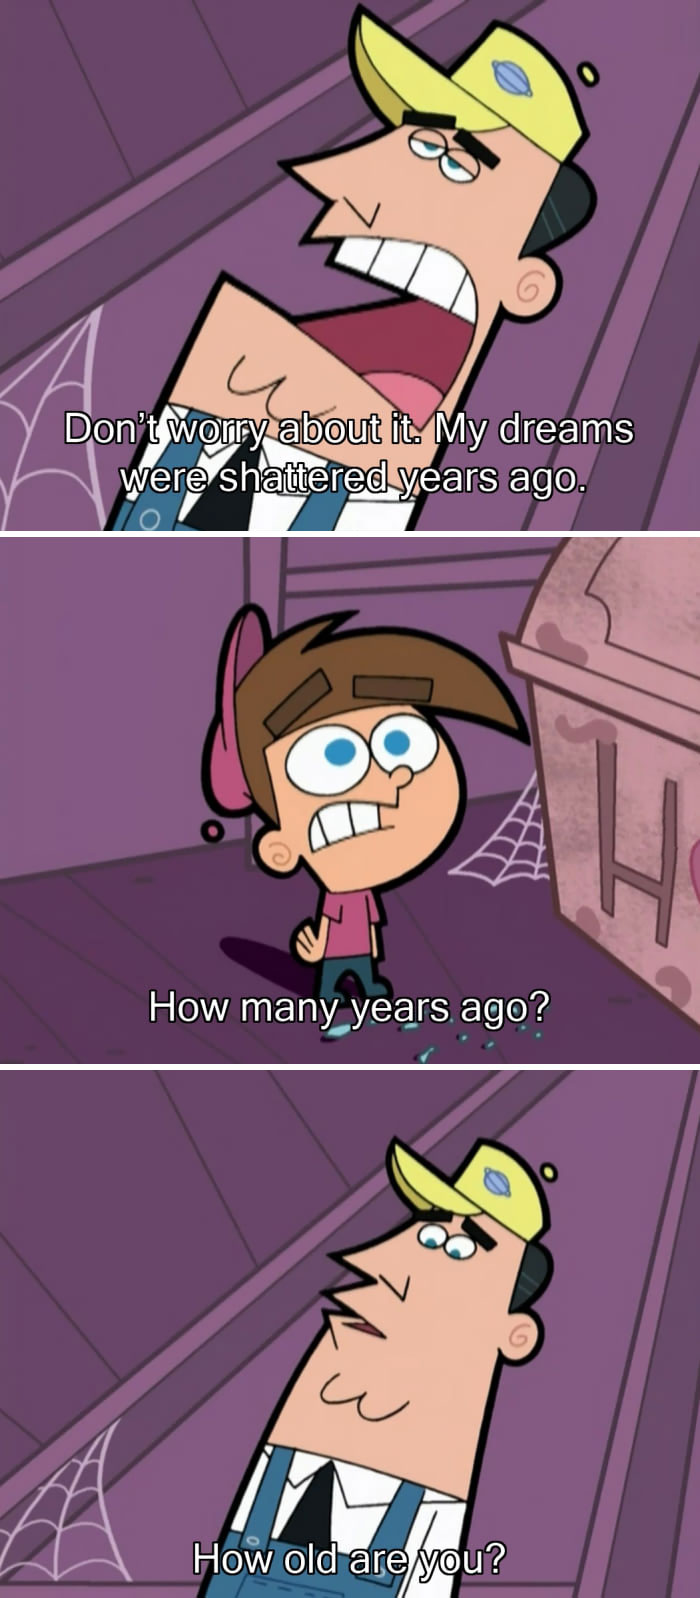 Poor Timmy